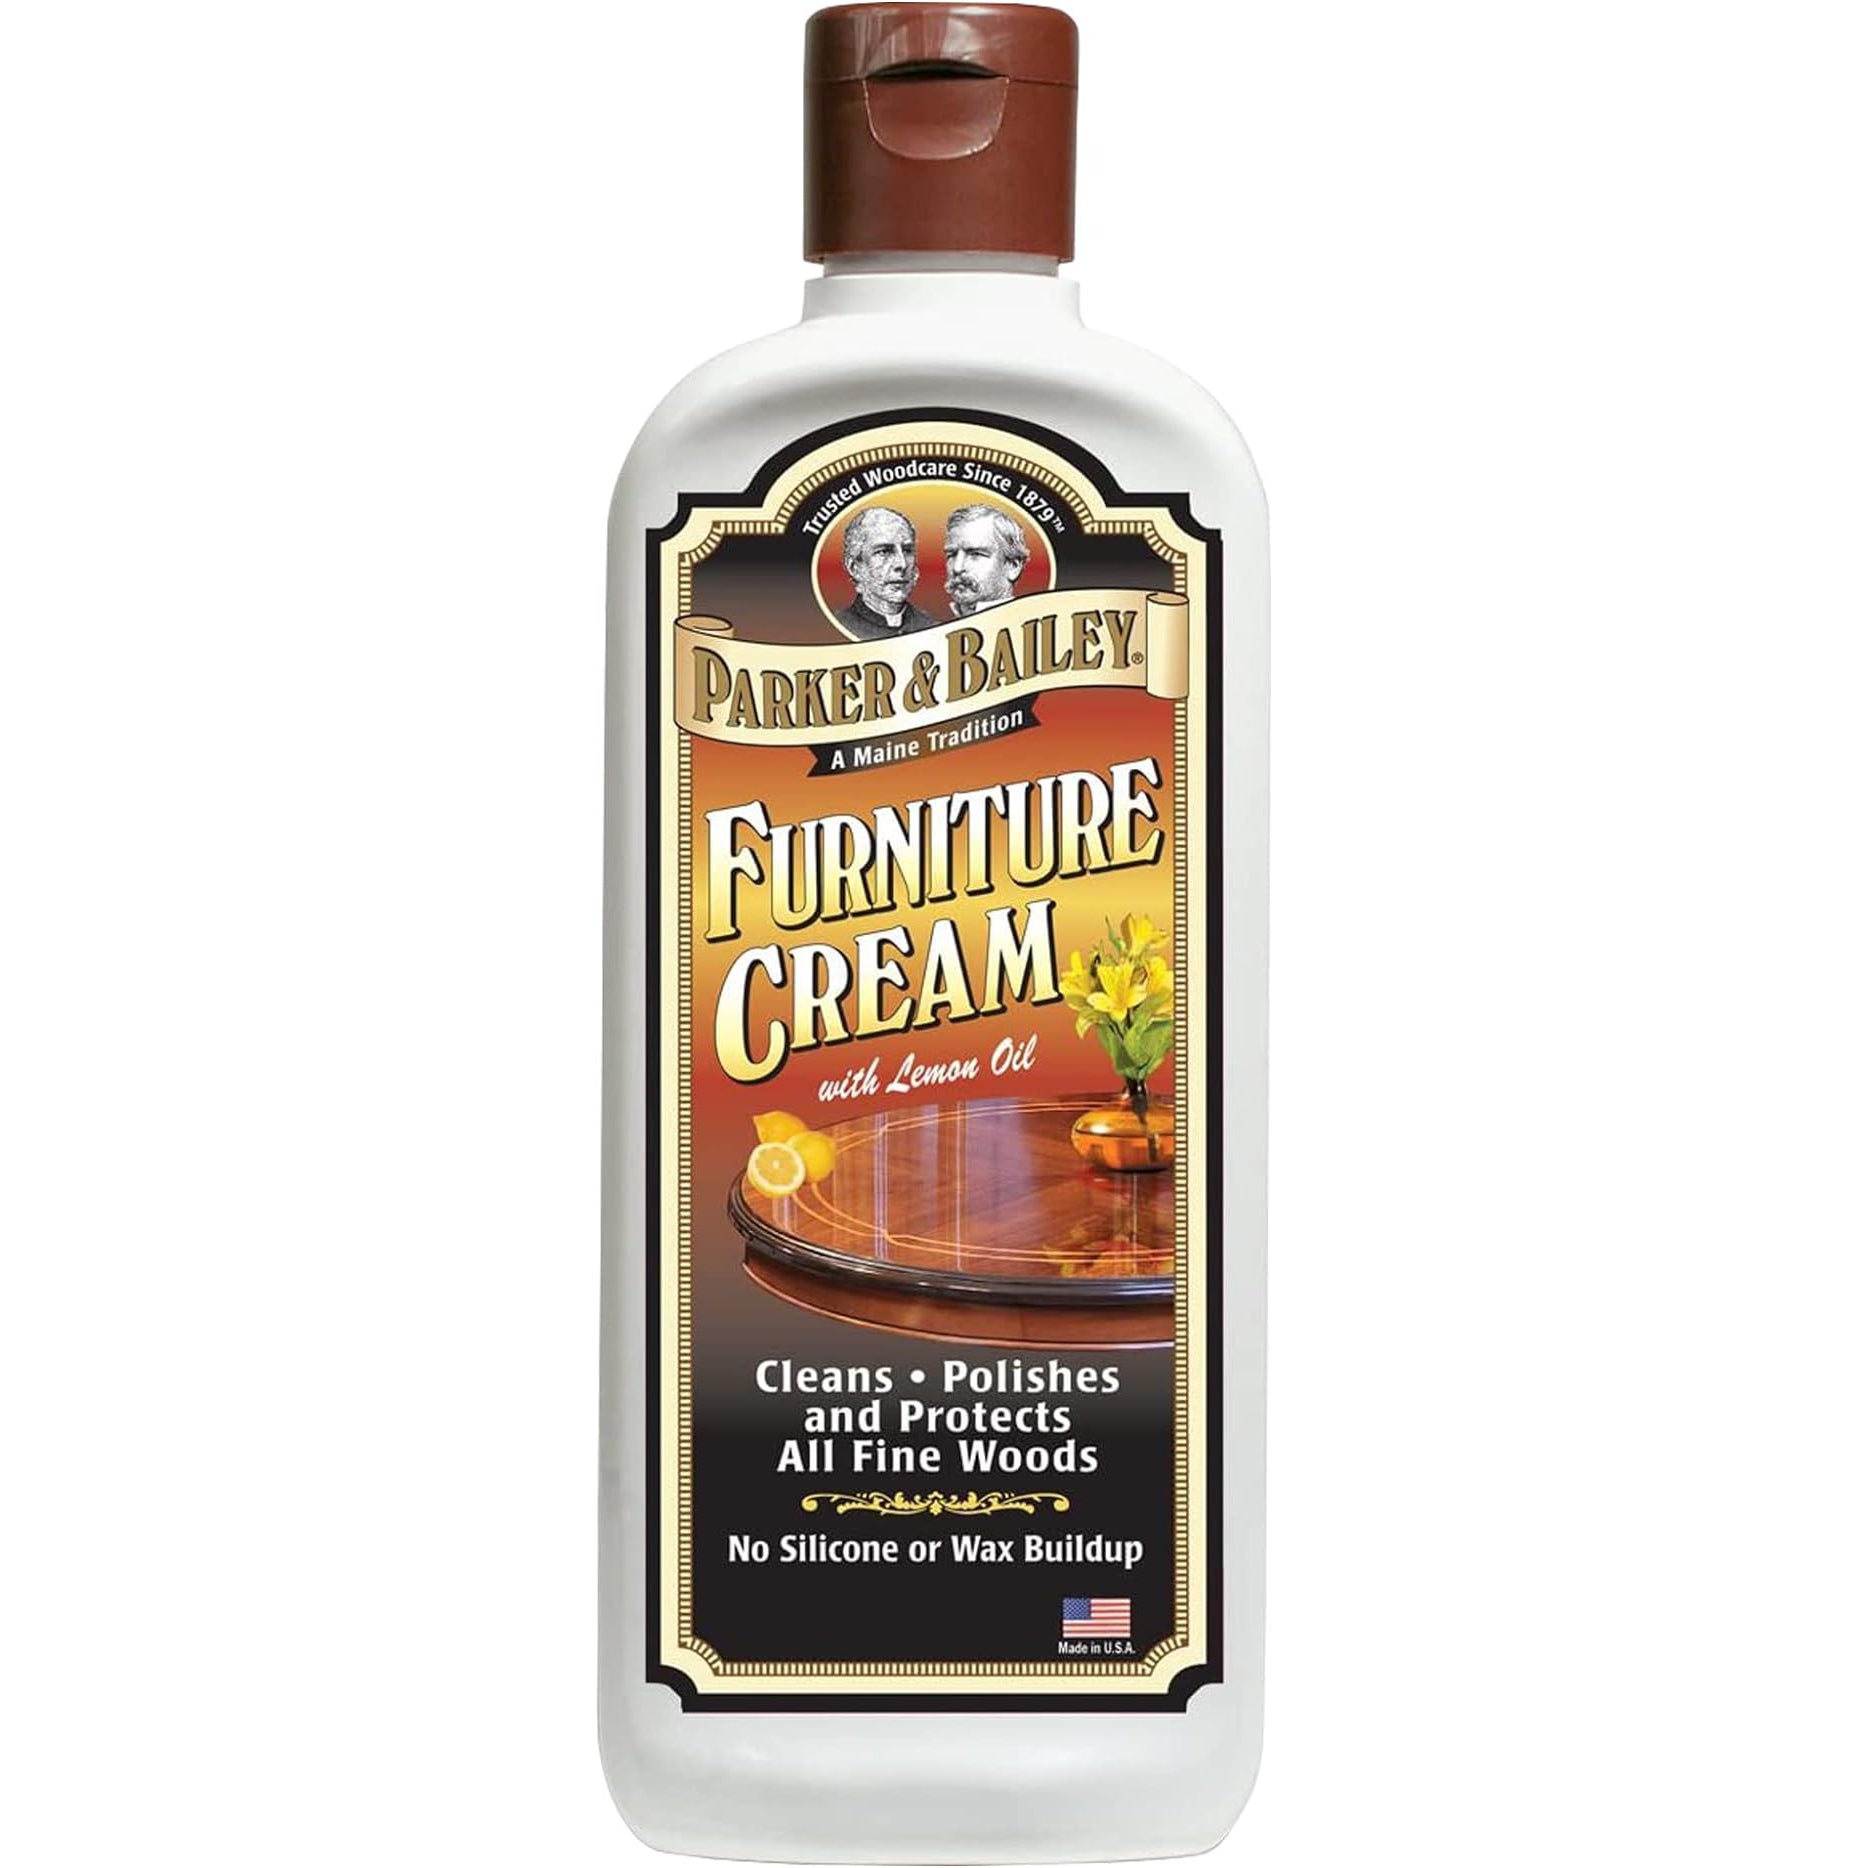 Parker & Bailey Furniture Cream with Lemon Oil - Multi-surface Wood Cleaner and Furniture Polish – 8oz.